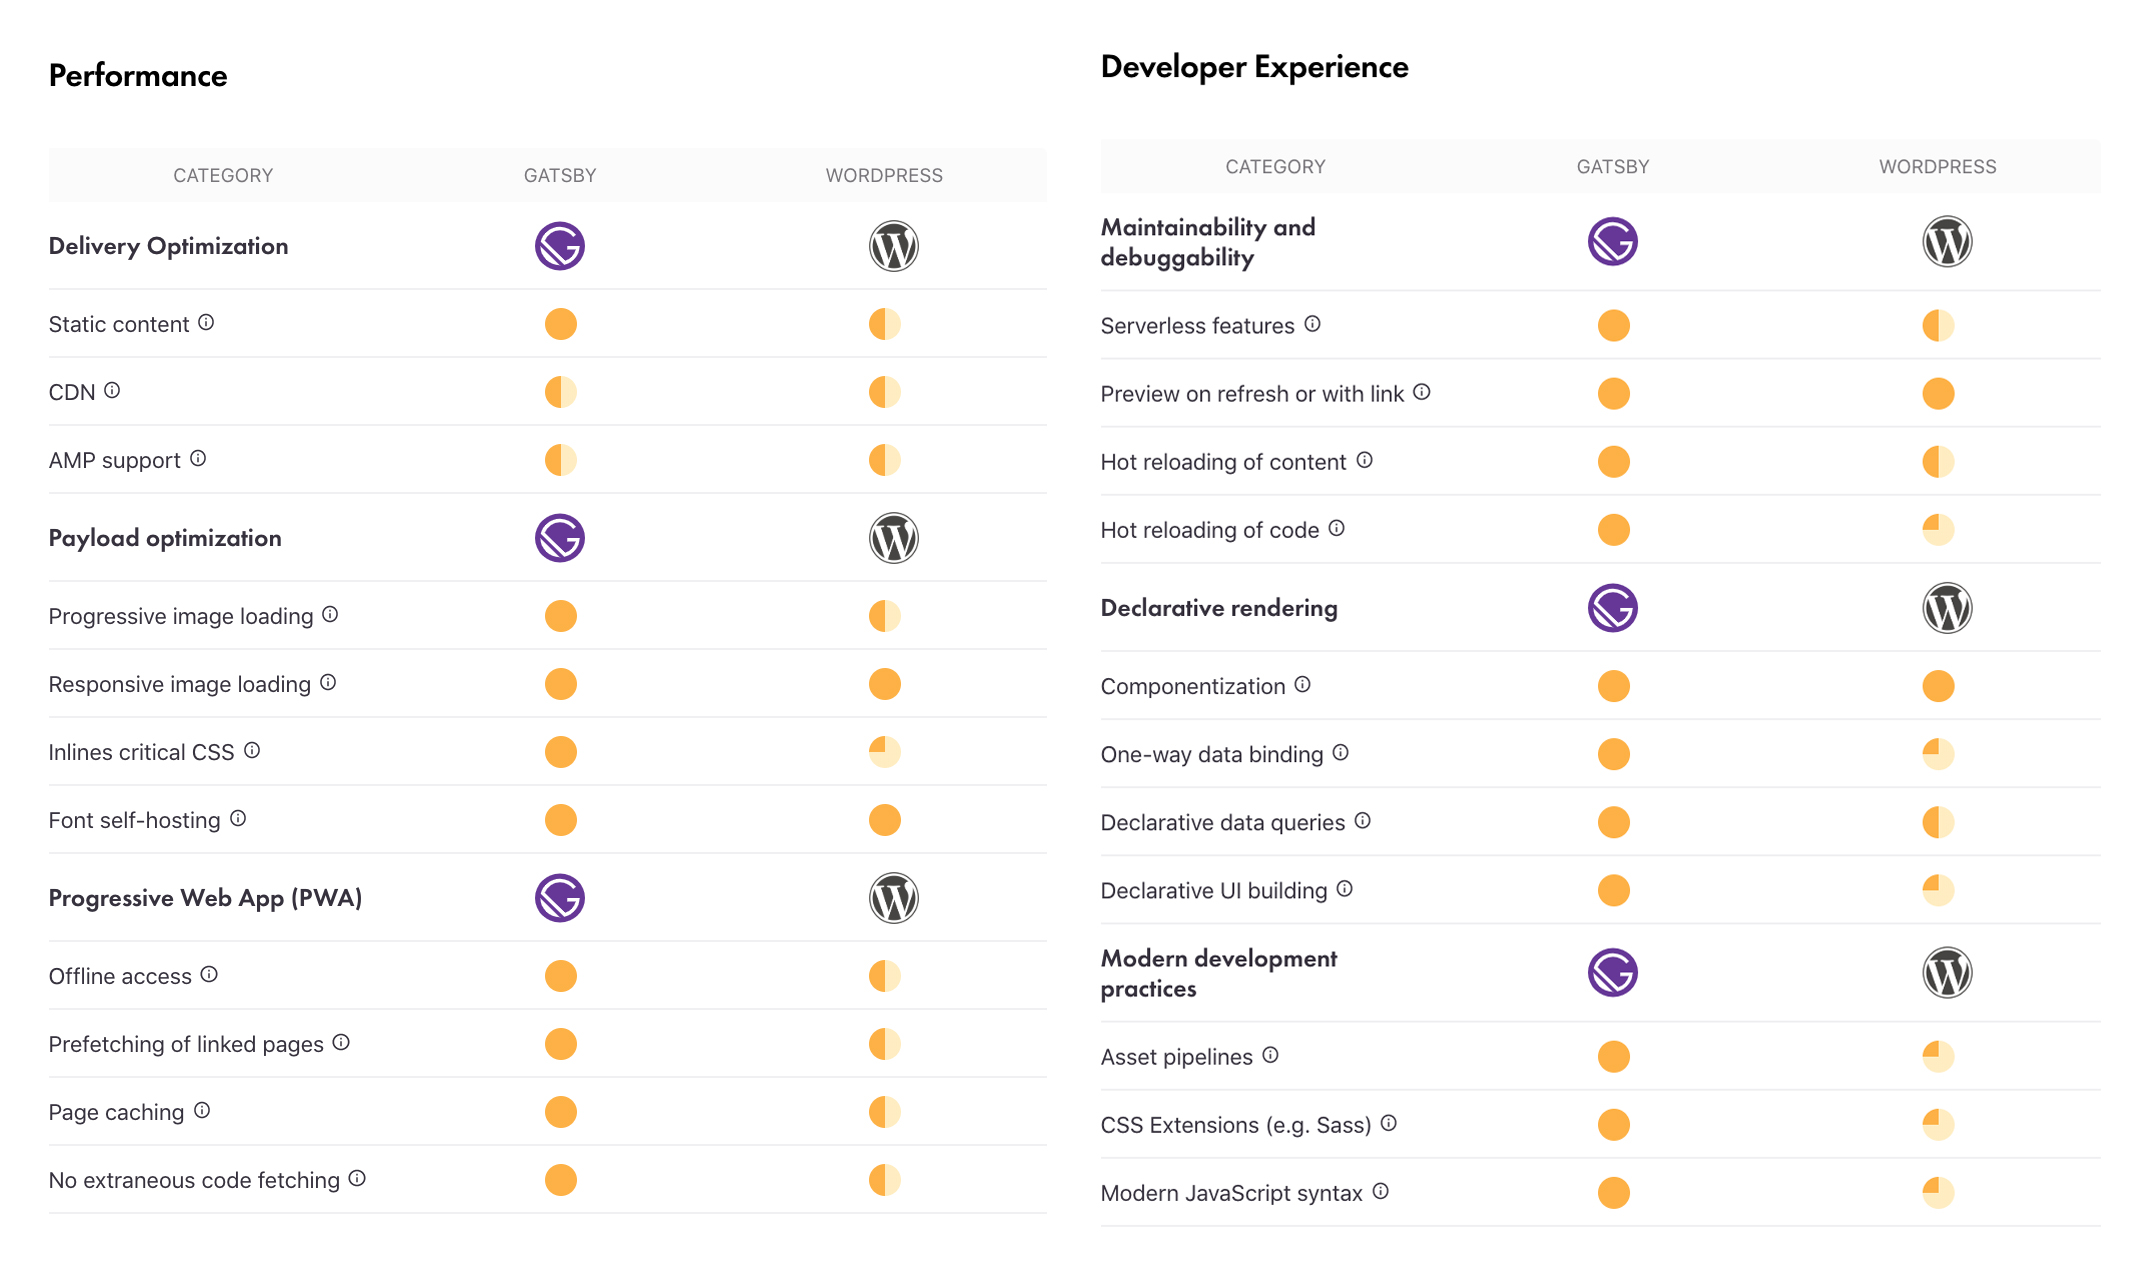 Performance and Developer Experience